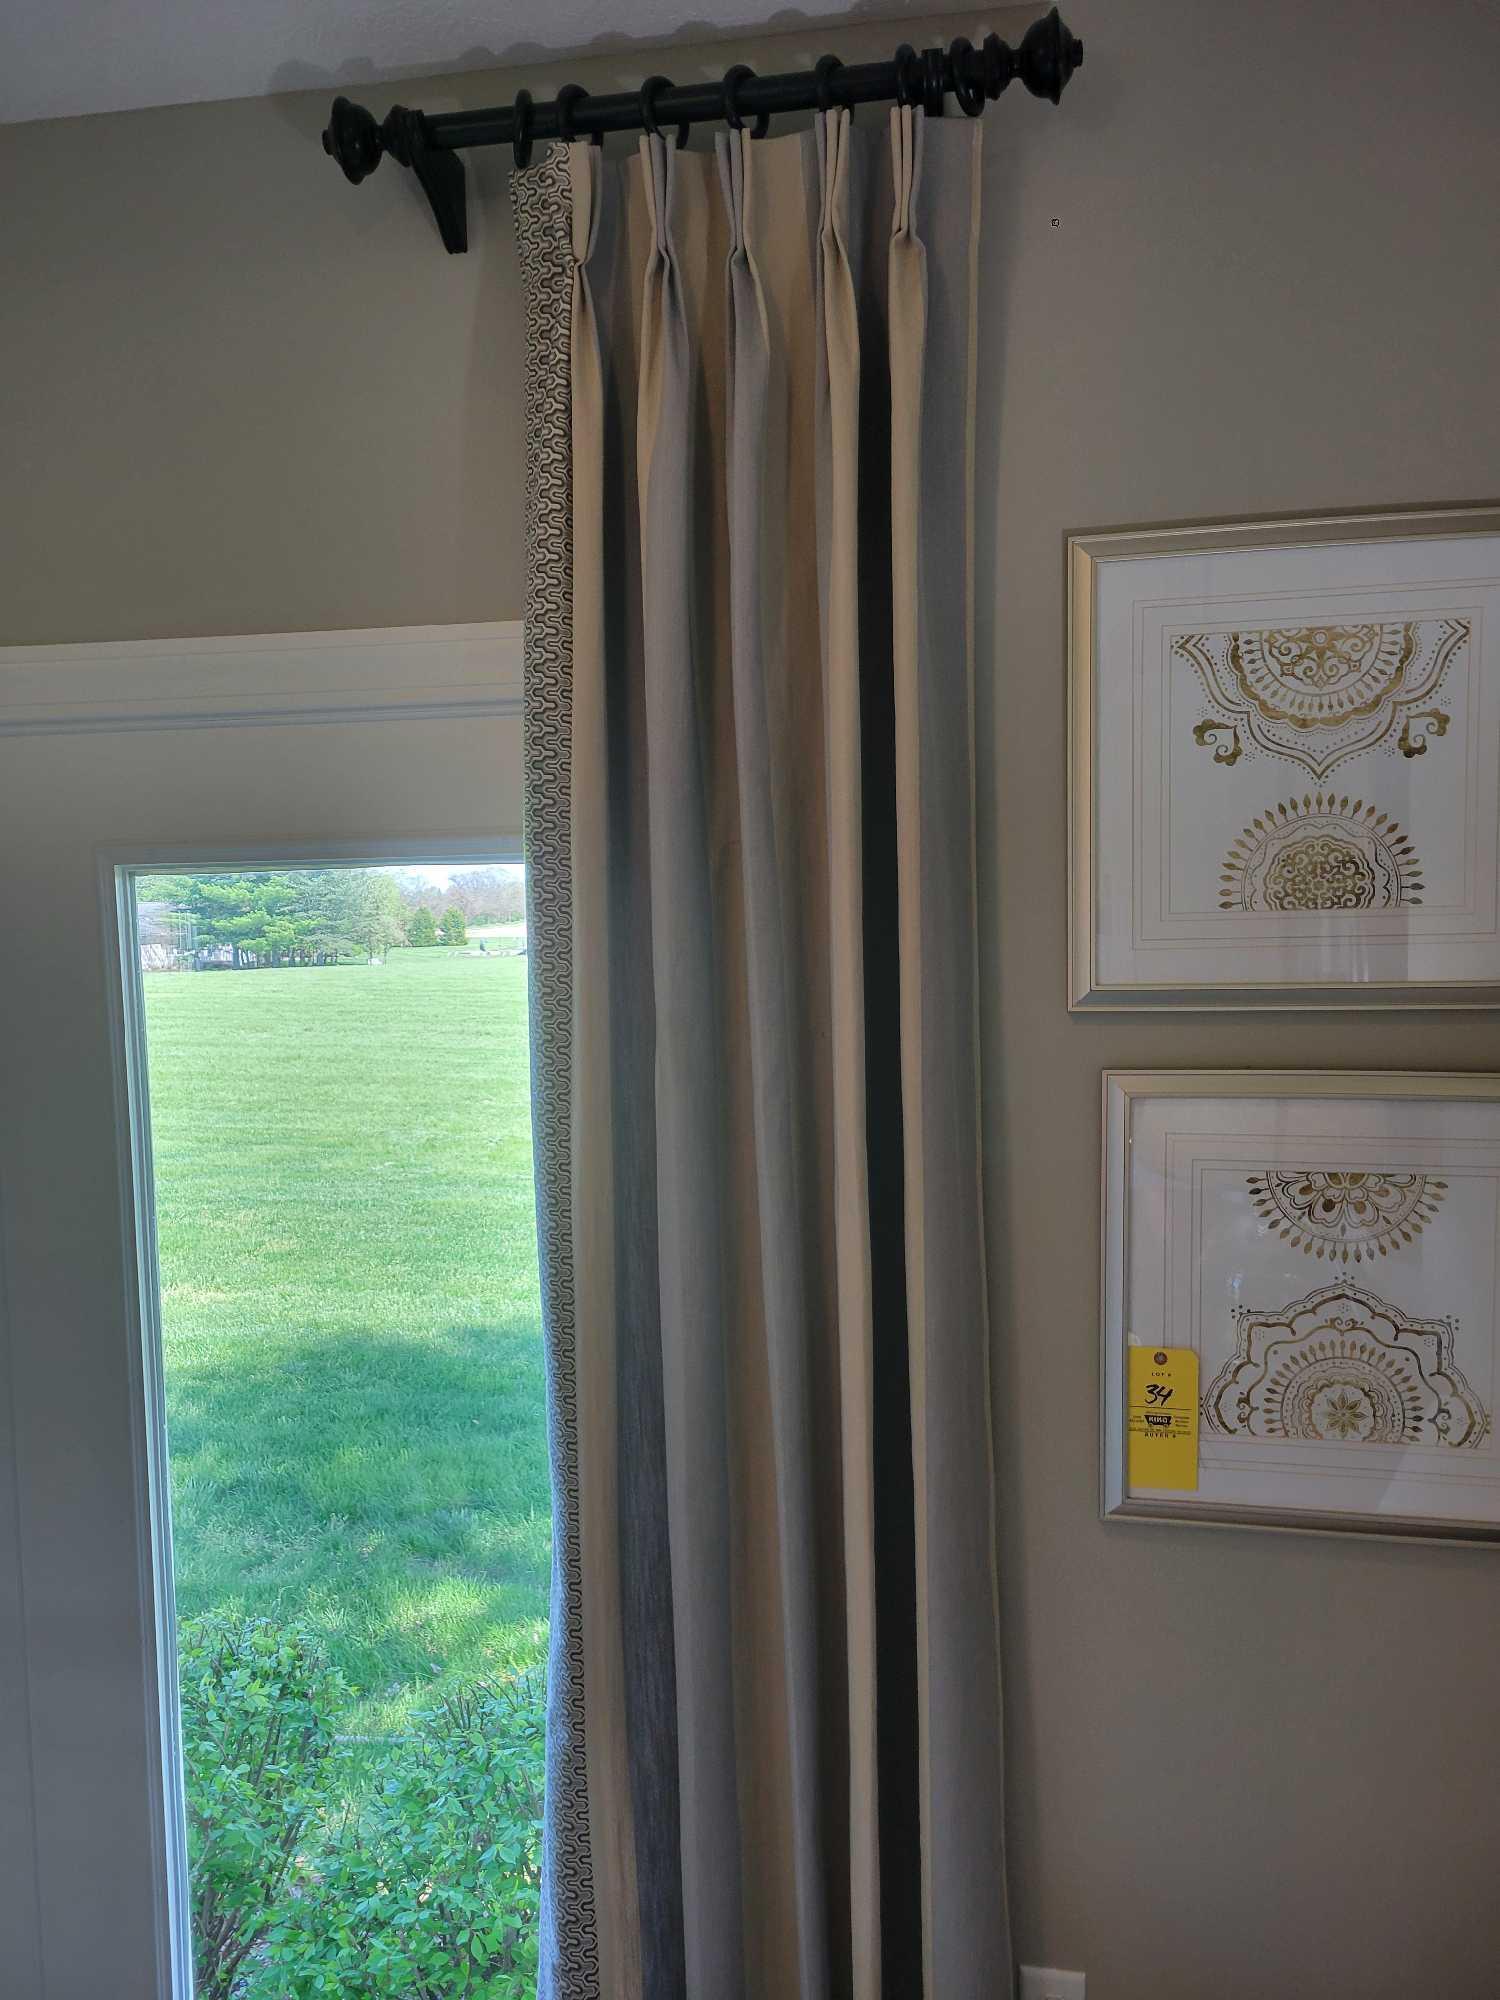 Set of 4 matching curtain panels with rods